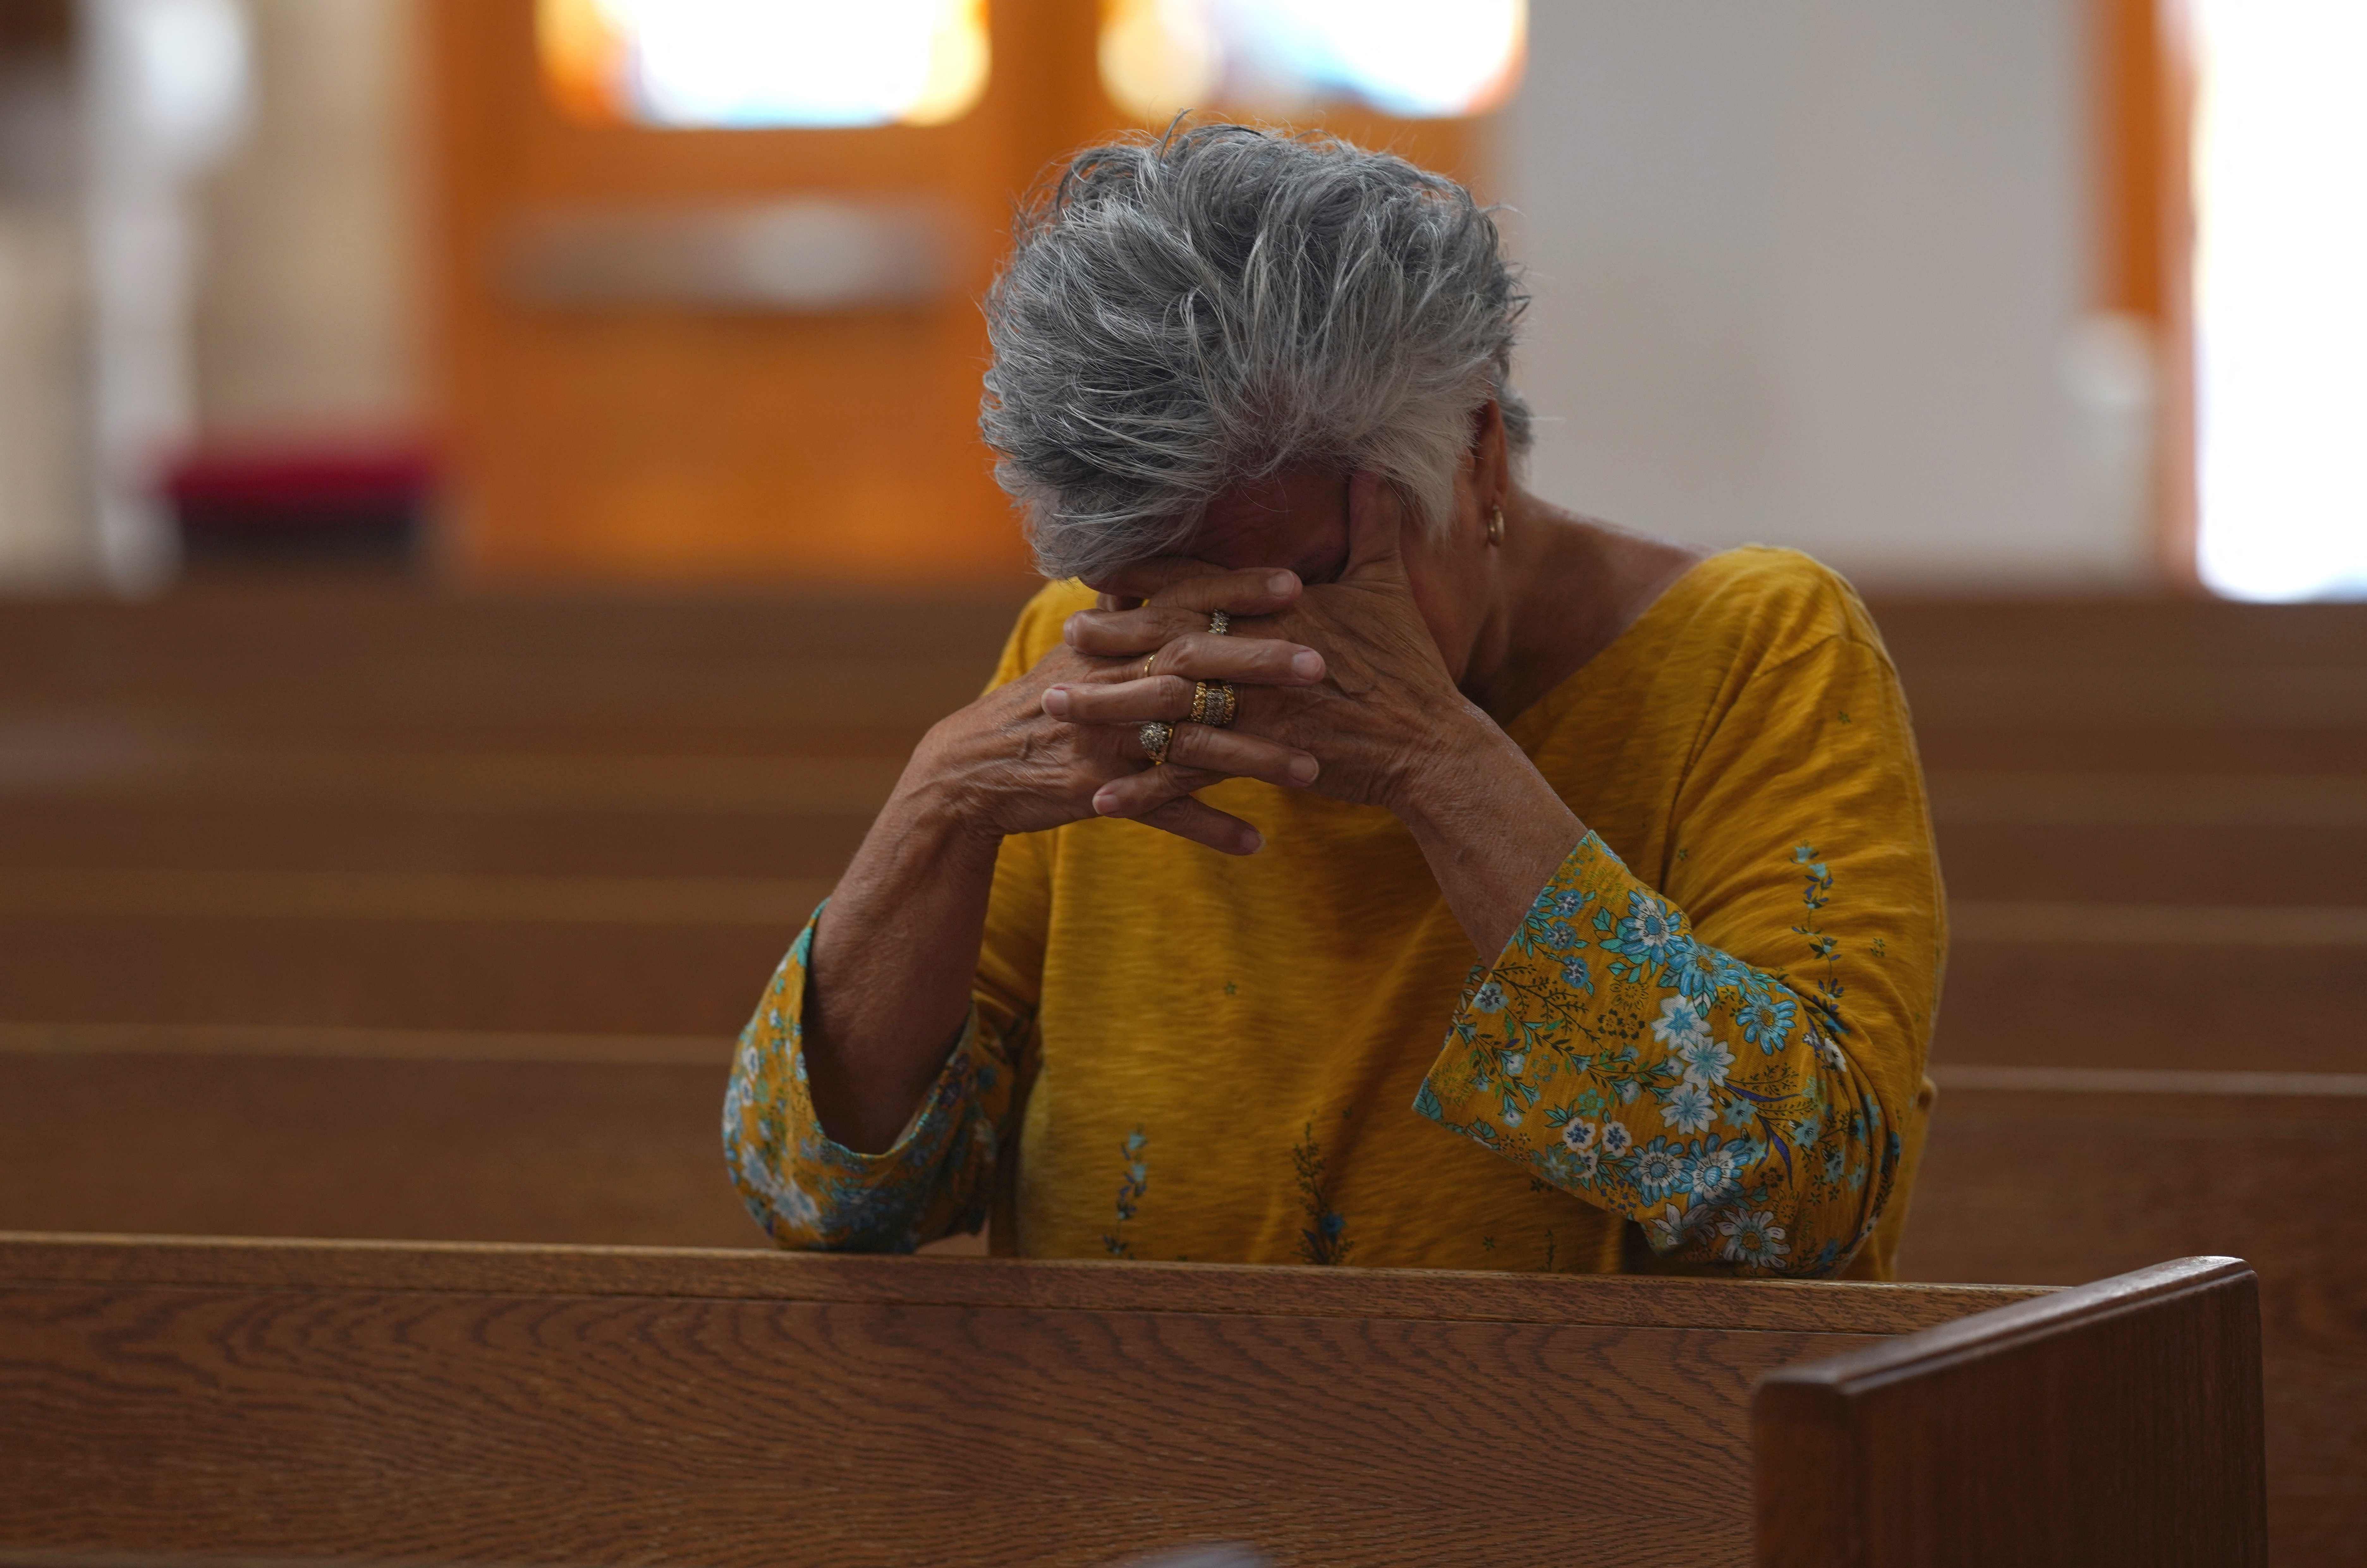 Catholic faithful attend a Mass at at Sacred Heart Catholic Church in Uvalde Texas, on May 25, 2022, one day after a gunman opened fire at Robb Elementary school. Credit: AFP Photo